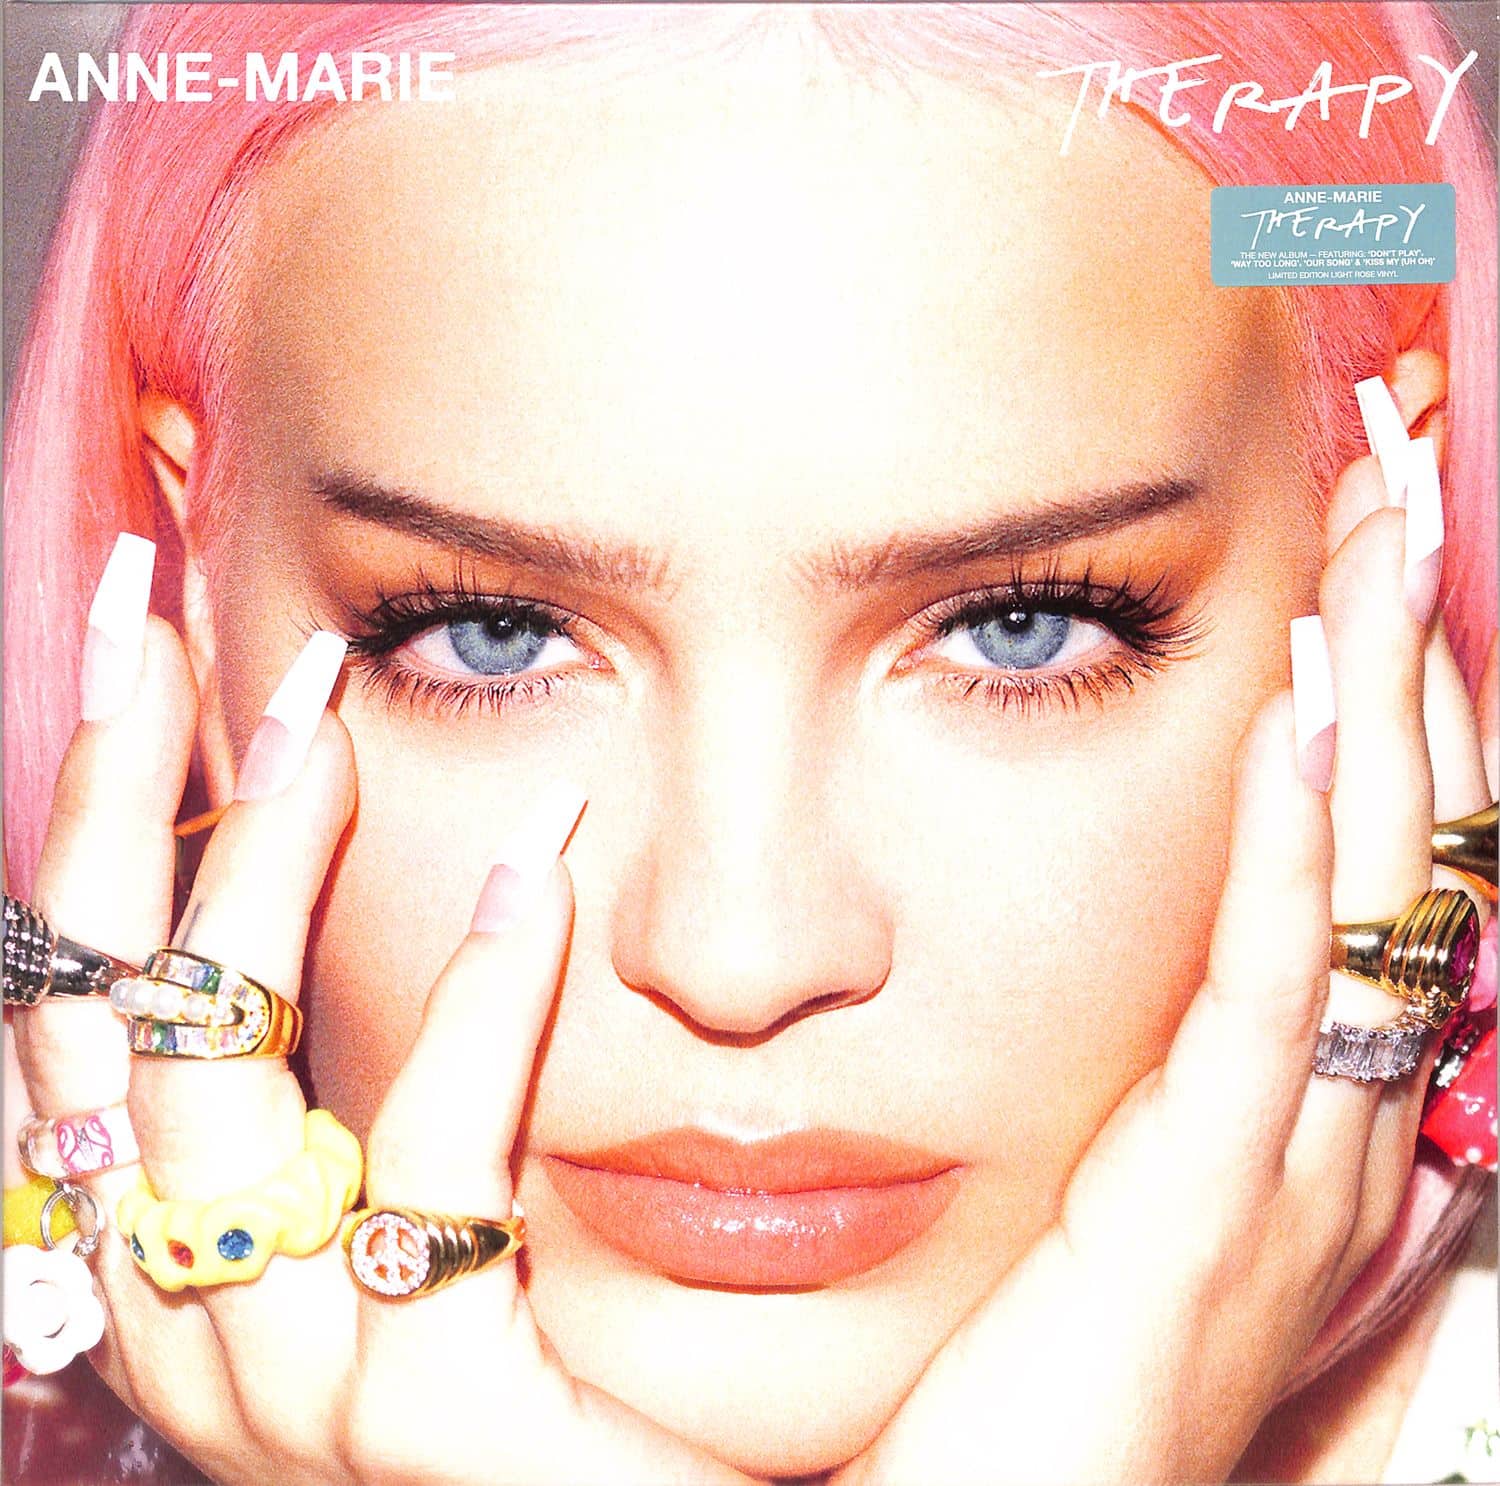 Anne-Marie - THERAPY 